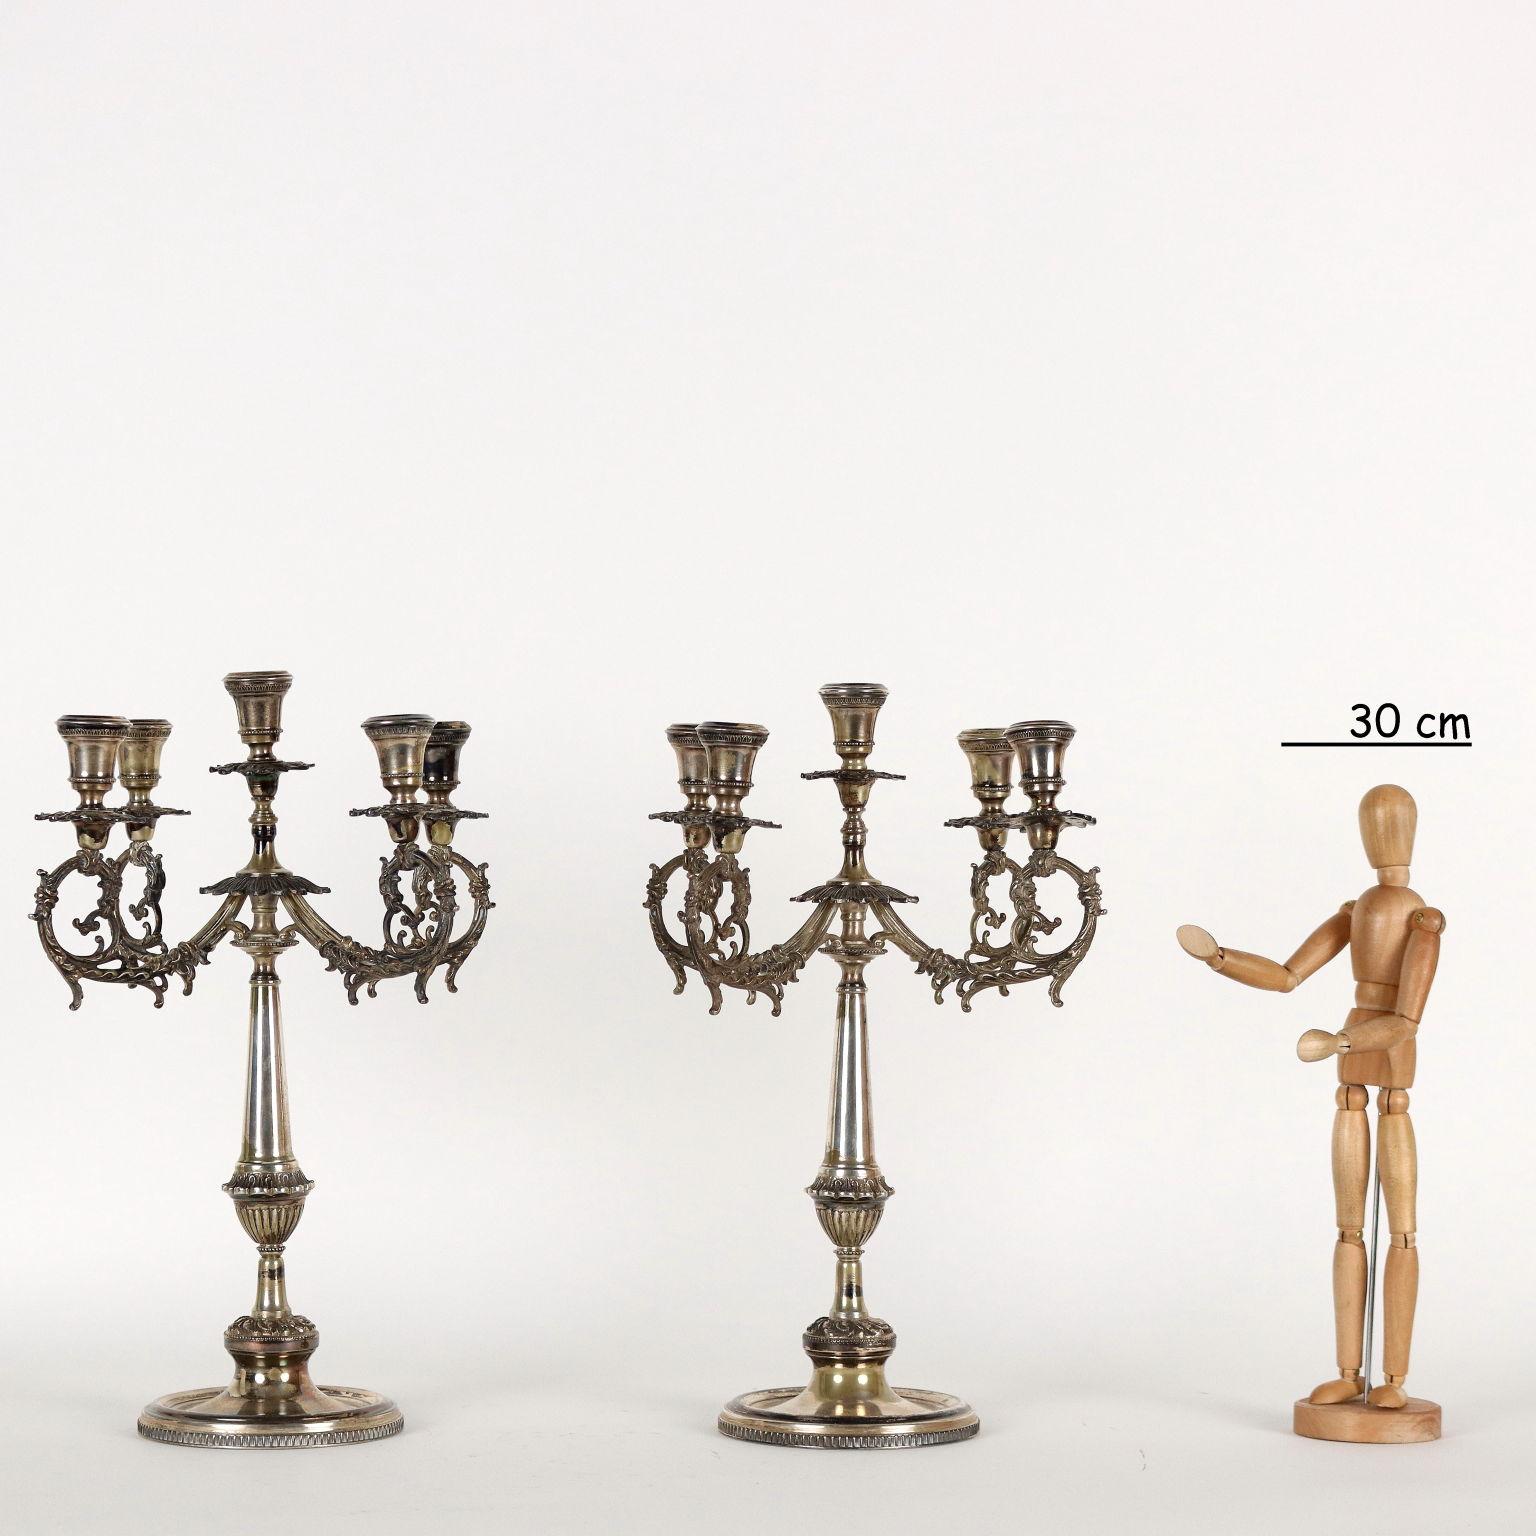 Pair of five-flame silver candelabra with leaf volute arms, zoomorphic heads and plant motifs decorations. Brand of silver and silversmith engraved at the base. Grams 2830.